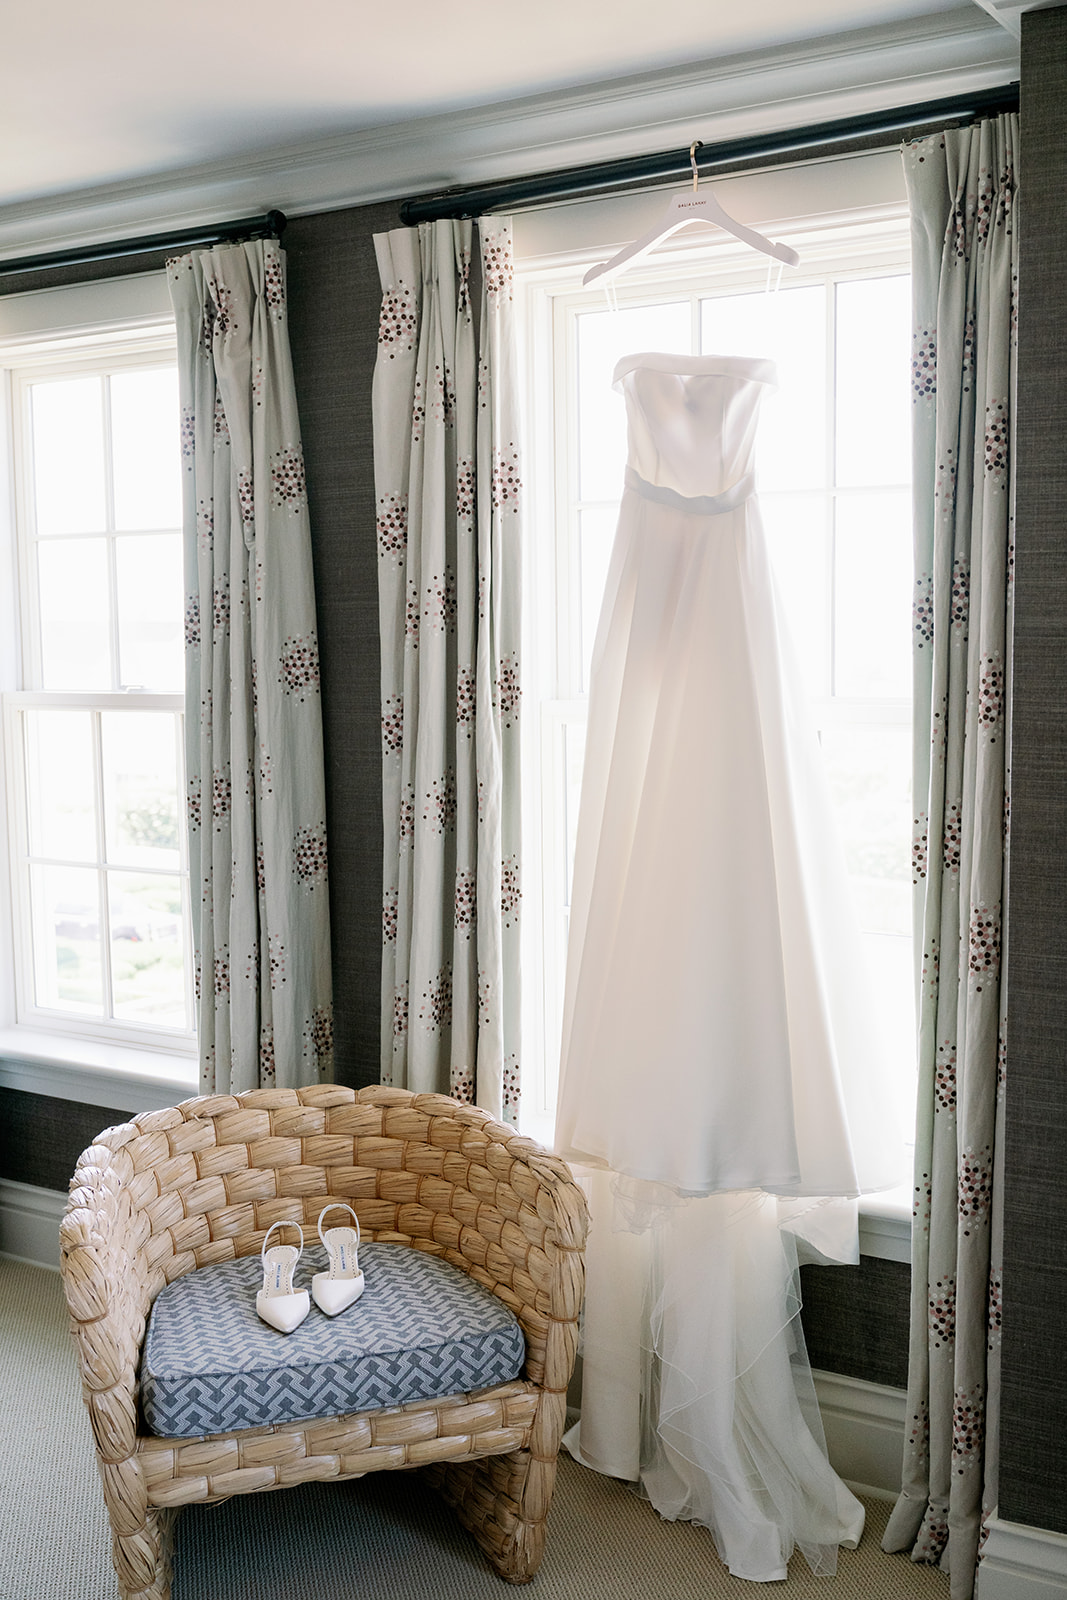 The Bride's wedding gown, "The Viv" hanging from a hotel window at Ocean House. 